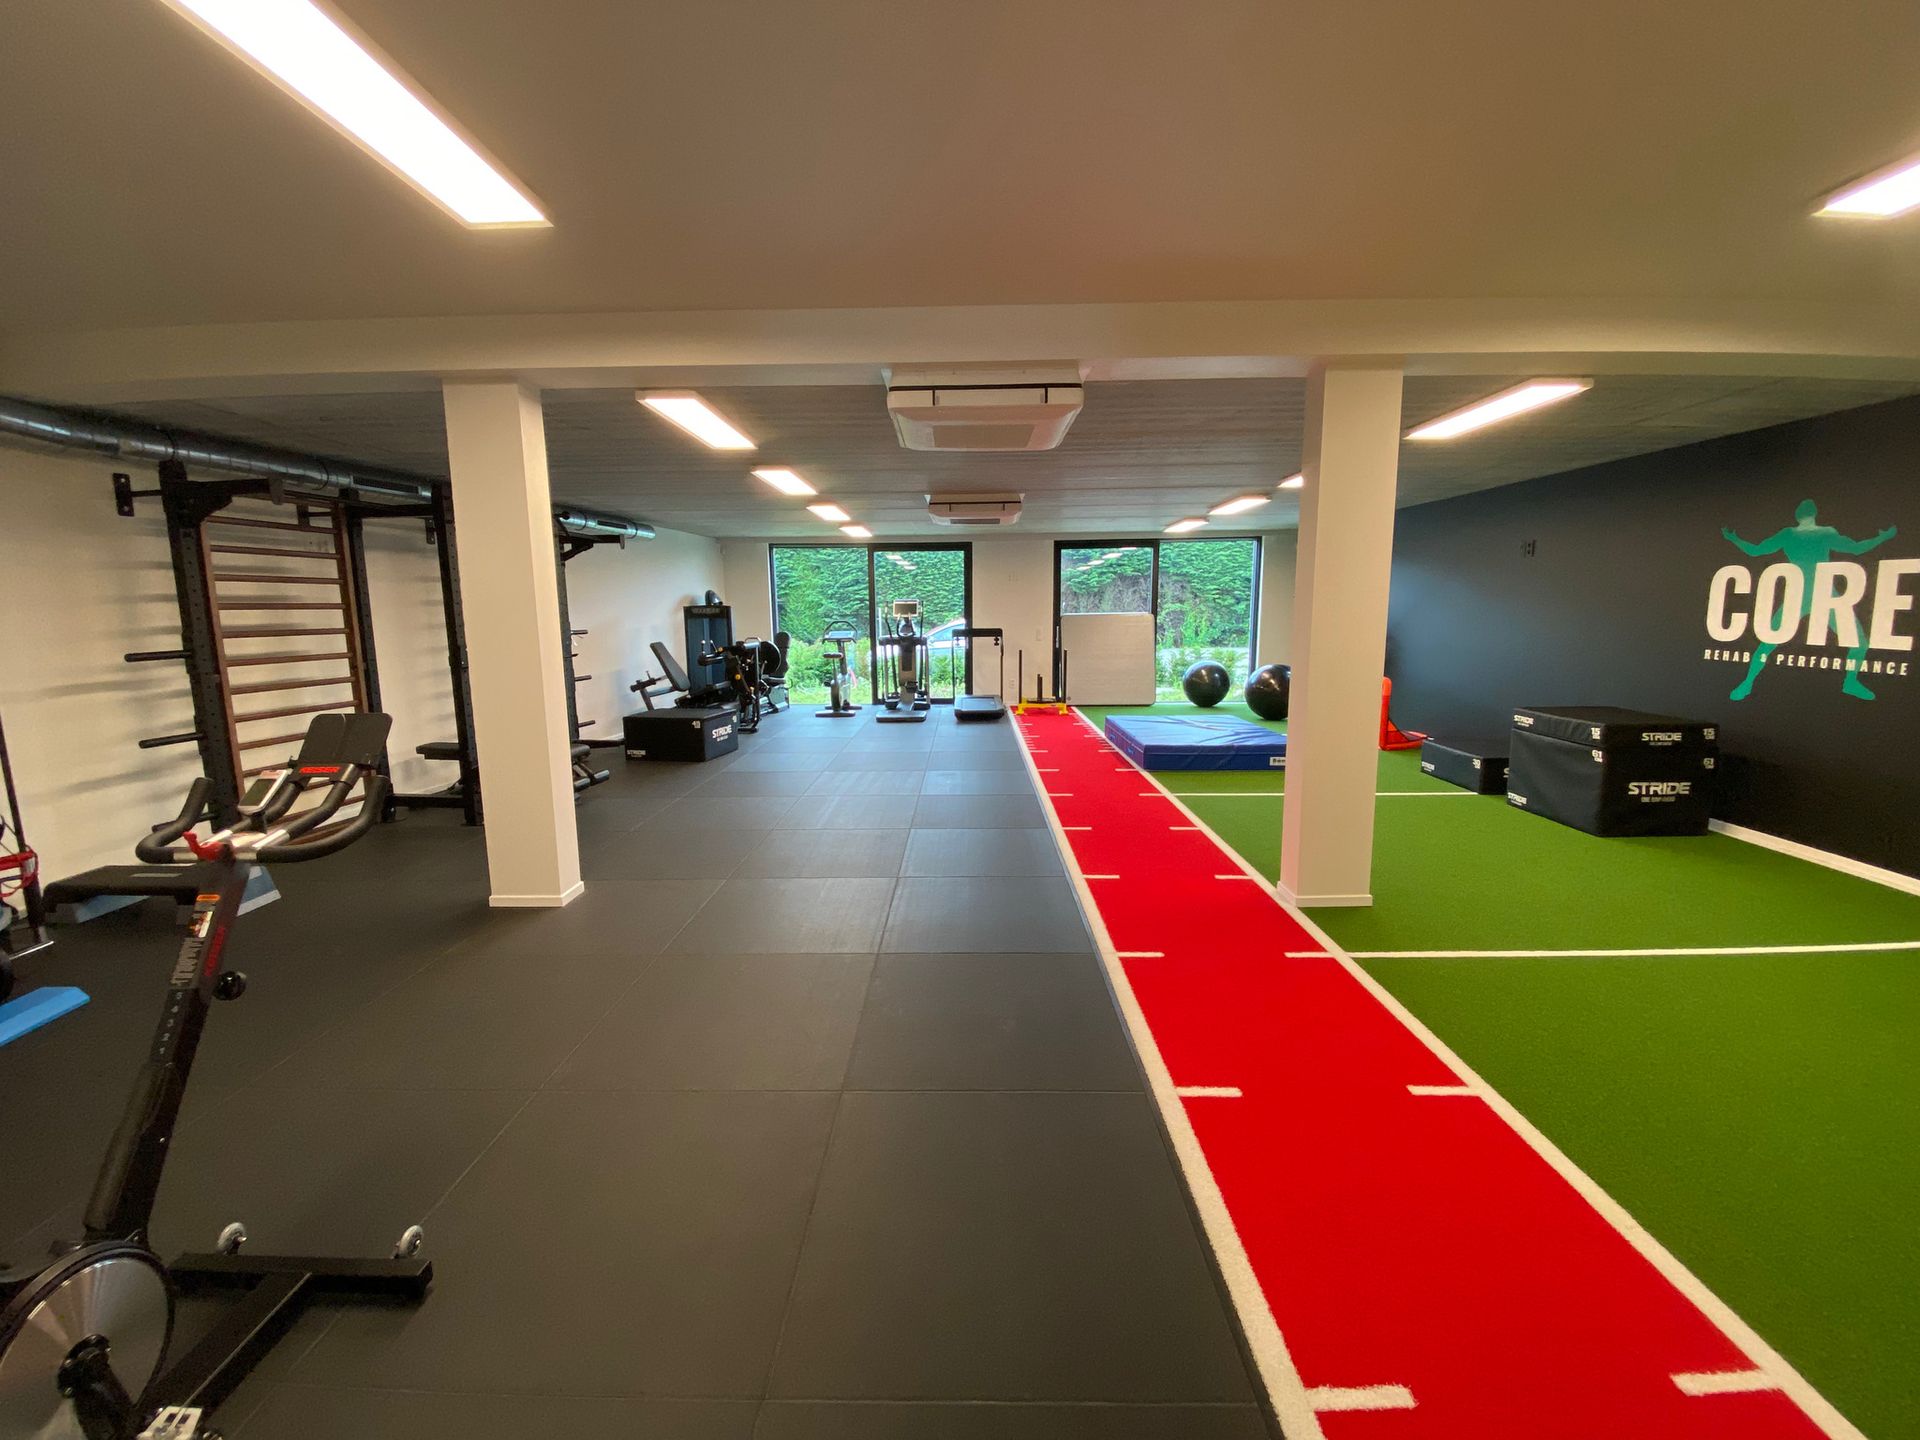 Premium tiles and mats in gym